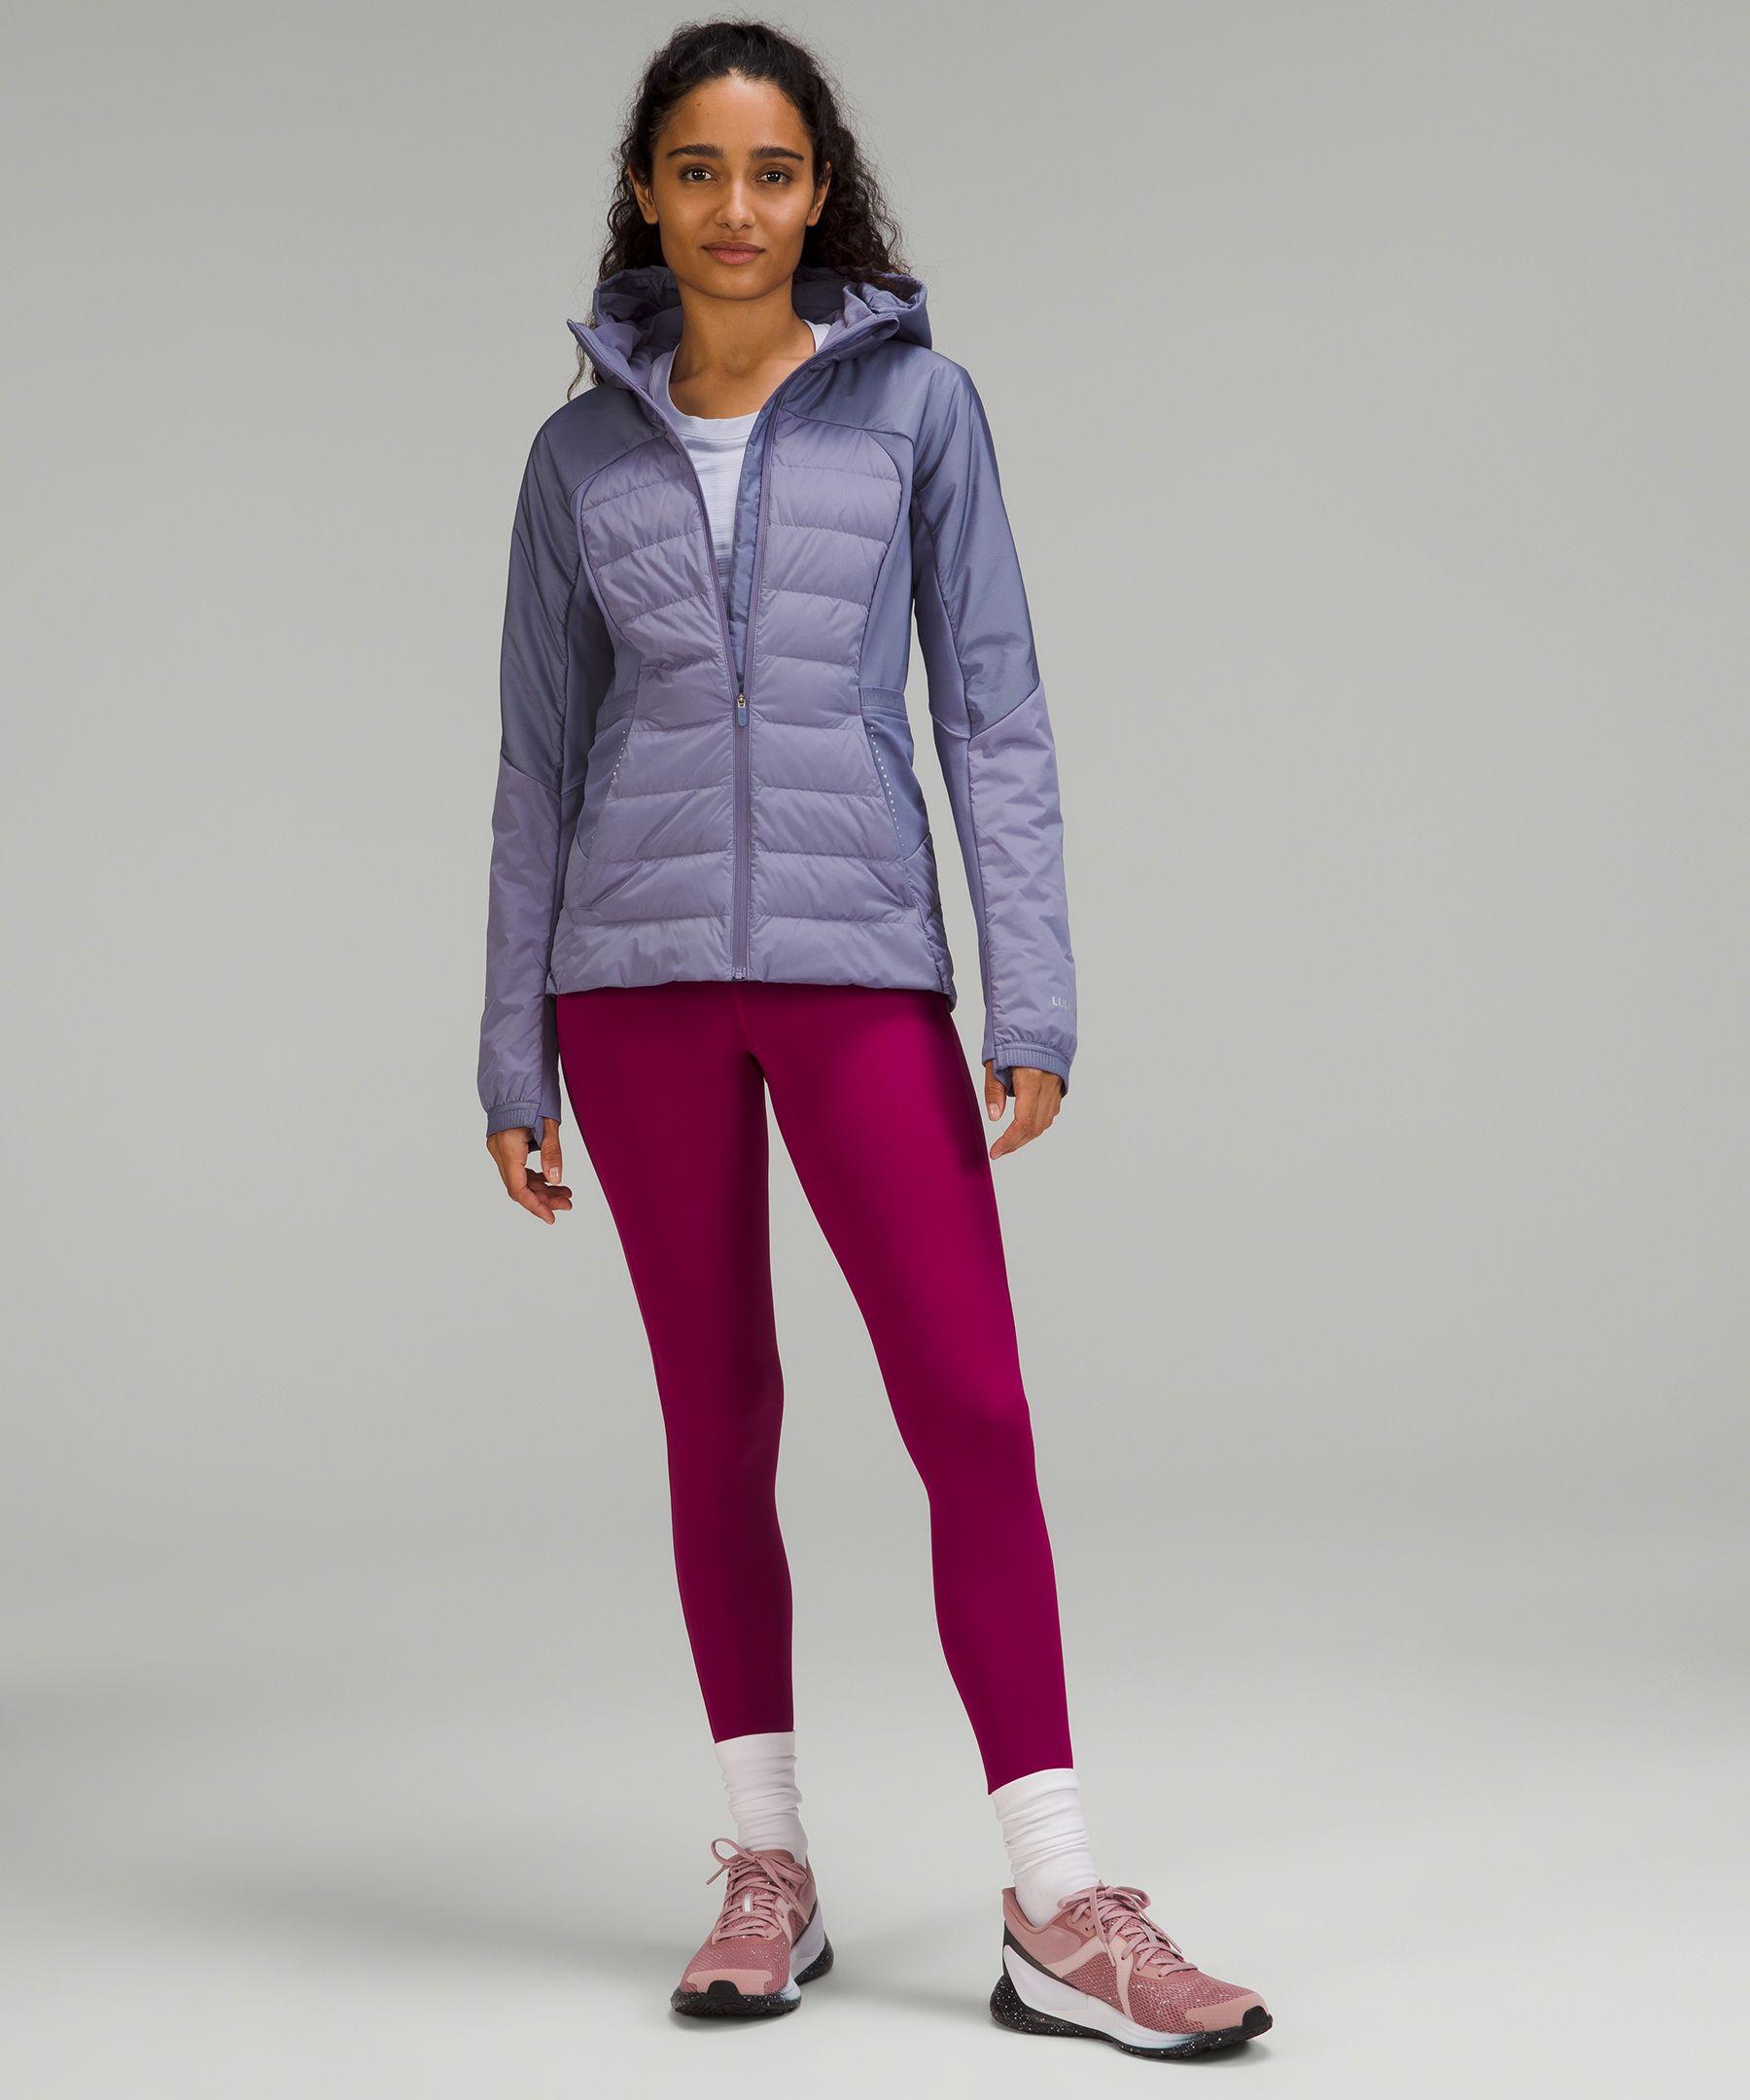 lululemon athletica Down For It All Jacket - Color Purple - Size 12